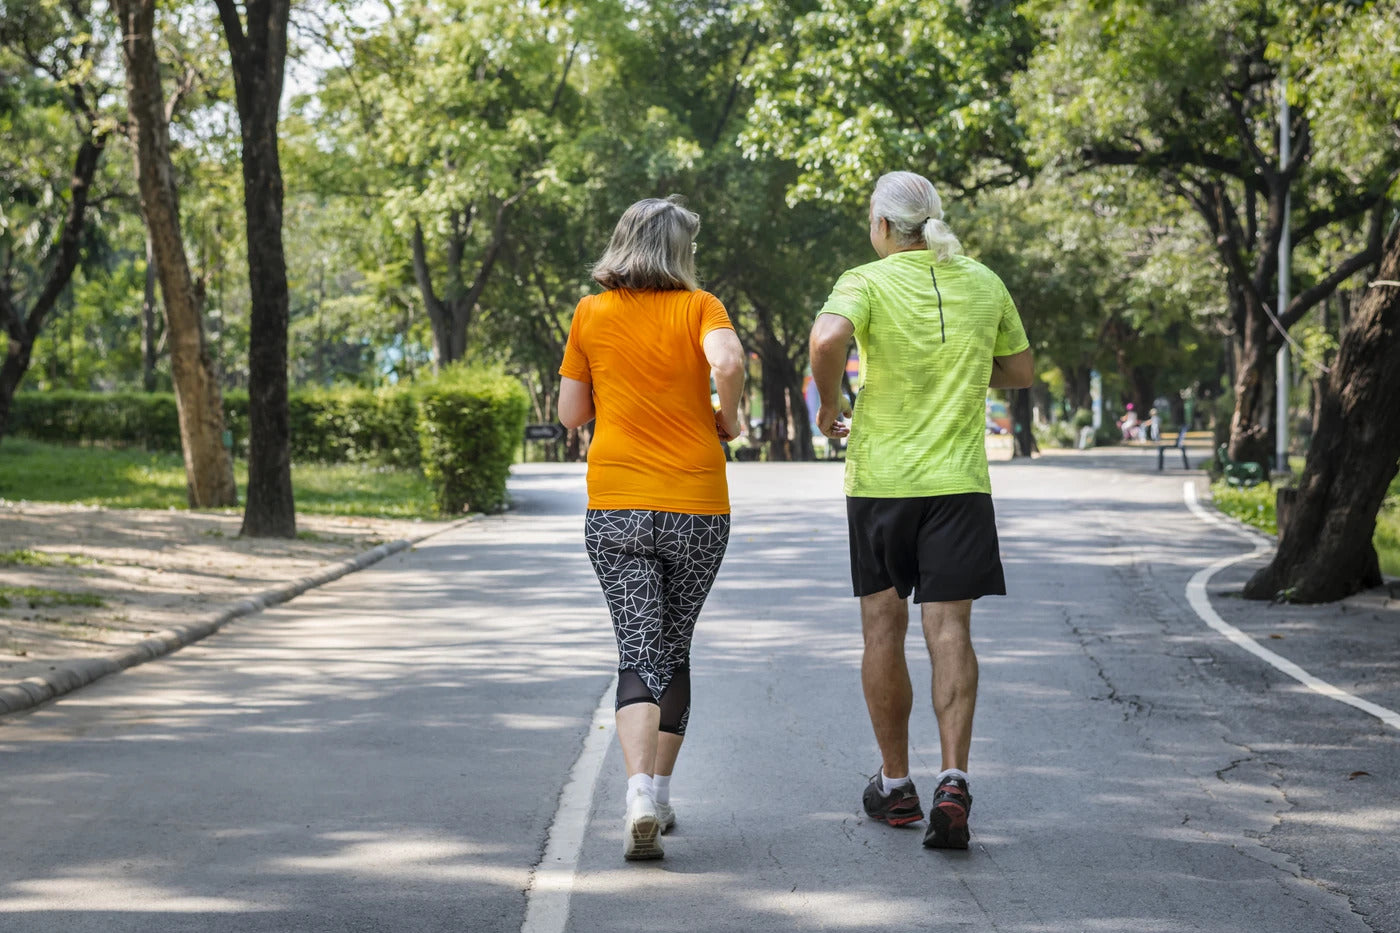 RECOVAPRO IN FOCUS: PHYSICAL ACTIVITY FOR OLDER ADULTS